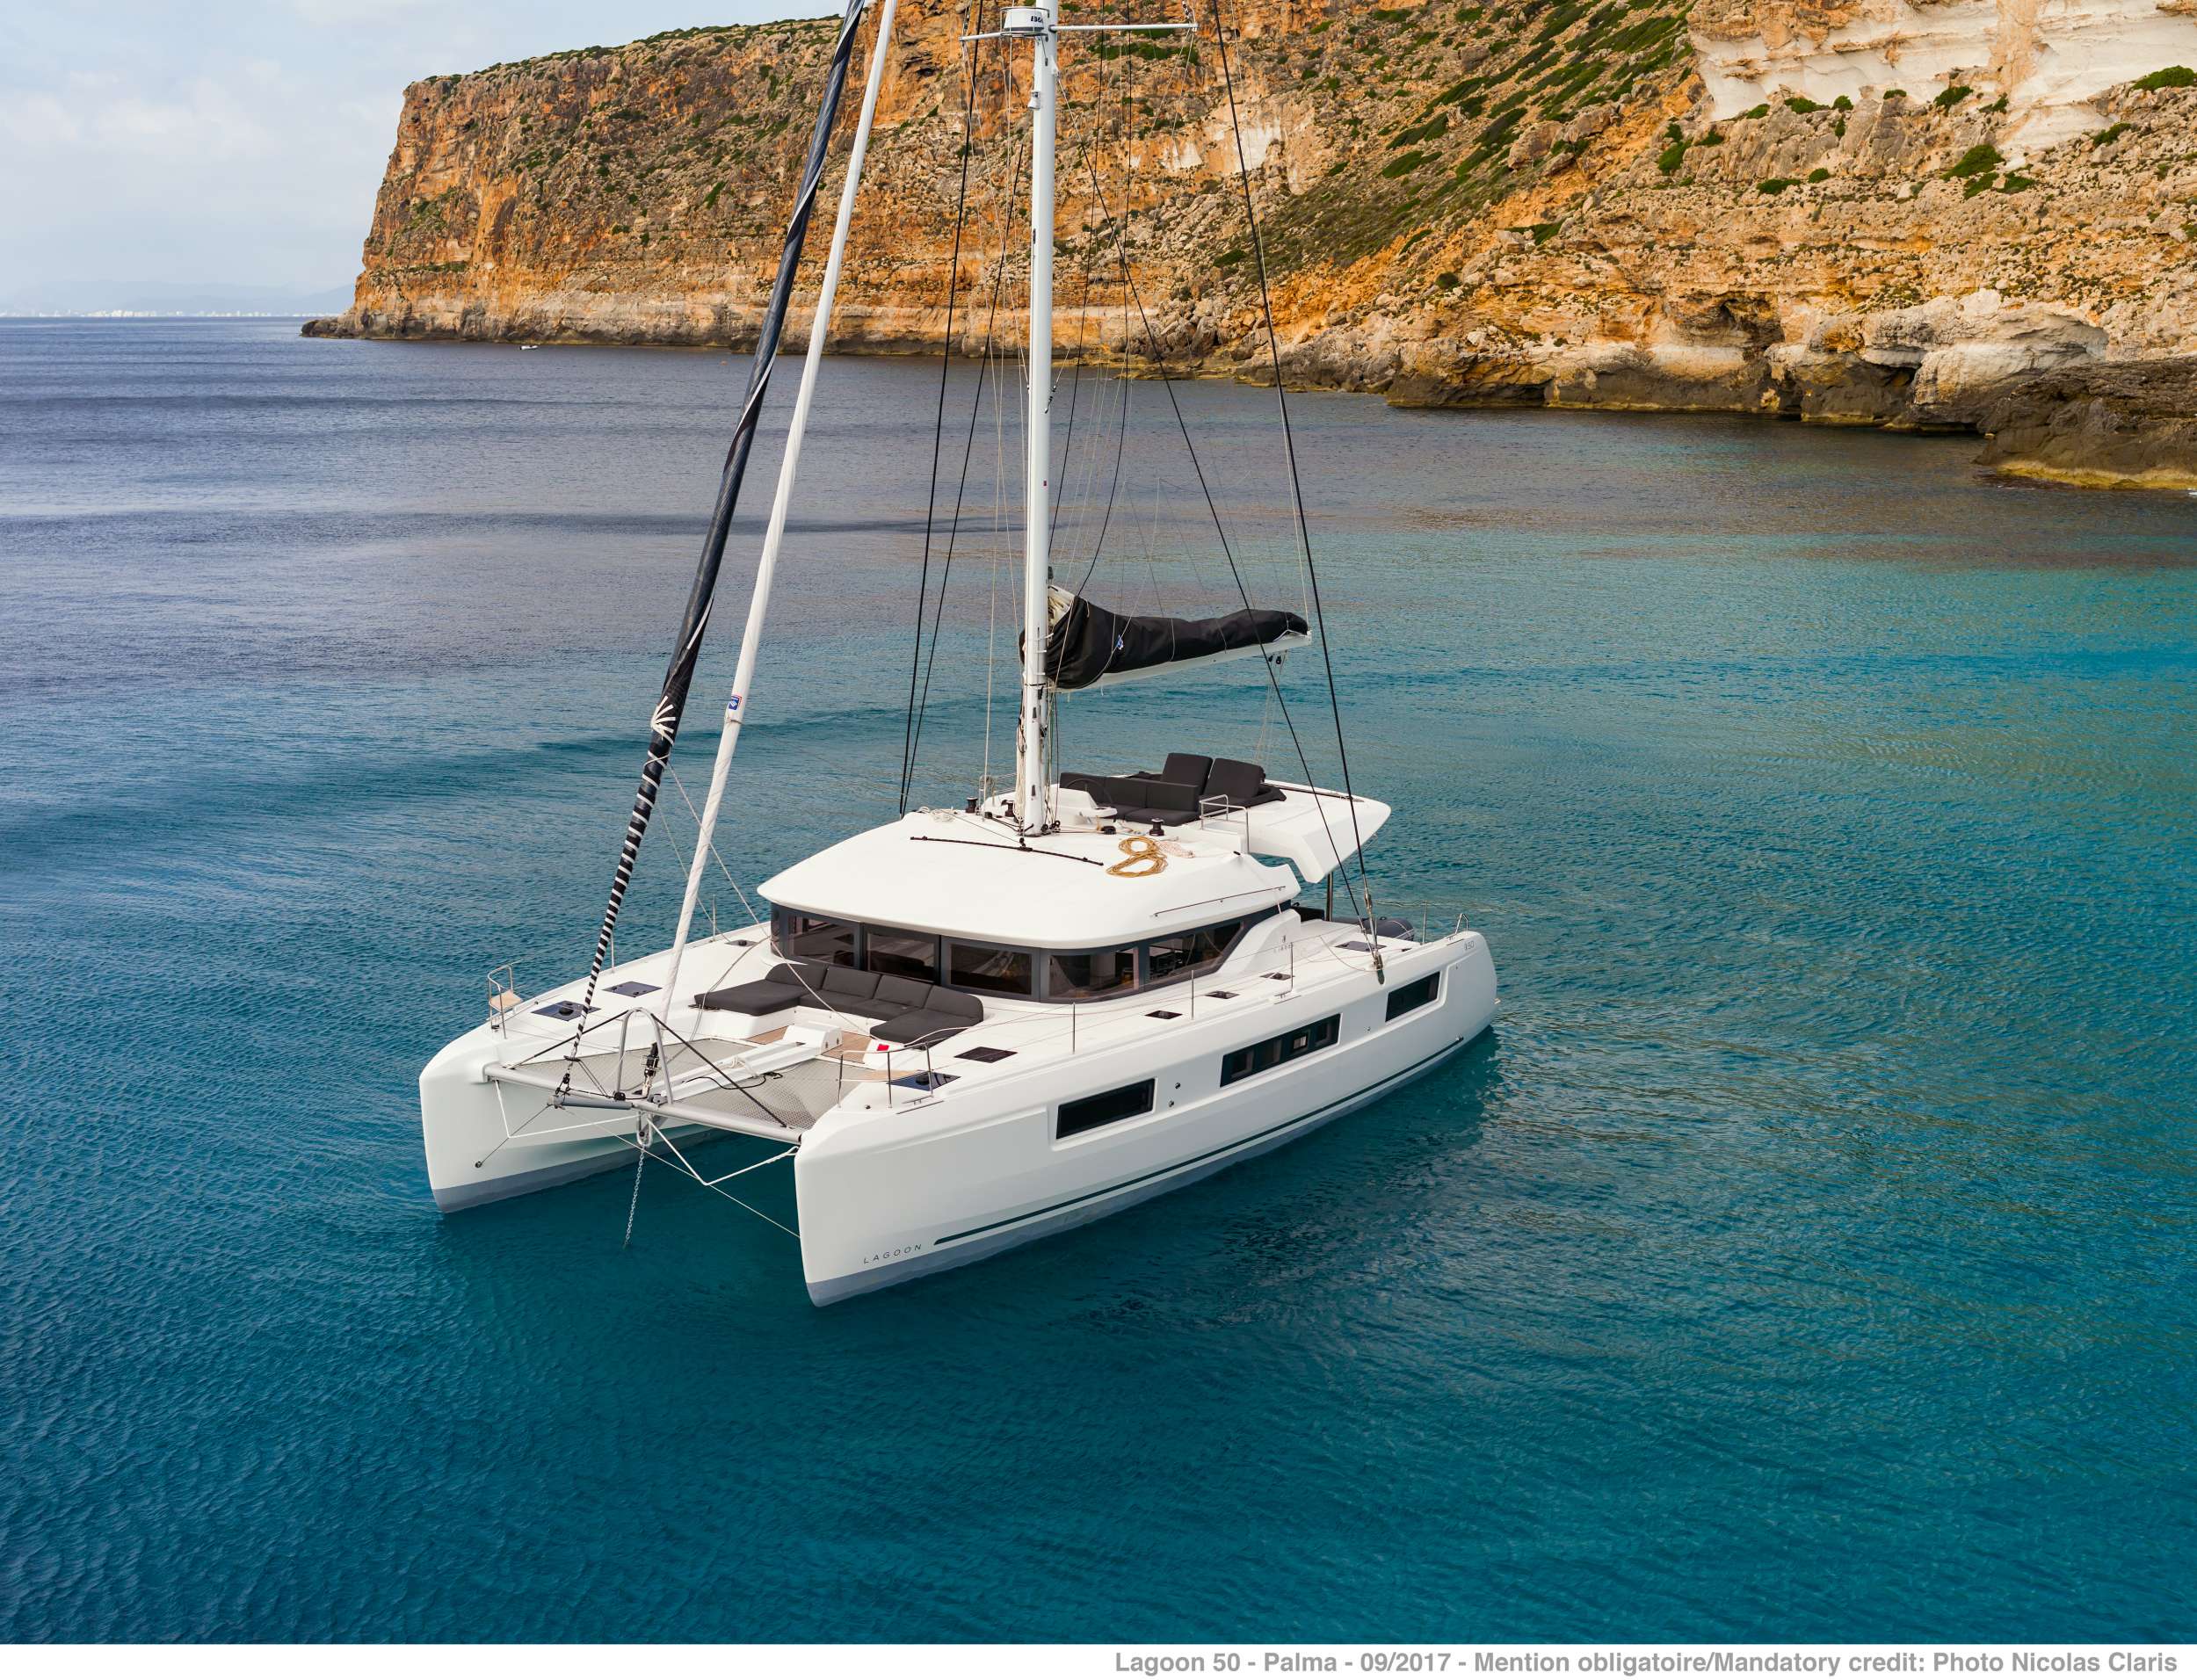 ONEIDA 2 - Yacht Charter Sithonia & Boat hire in Greece 1